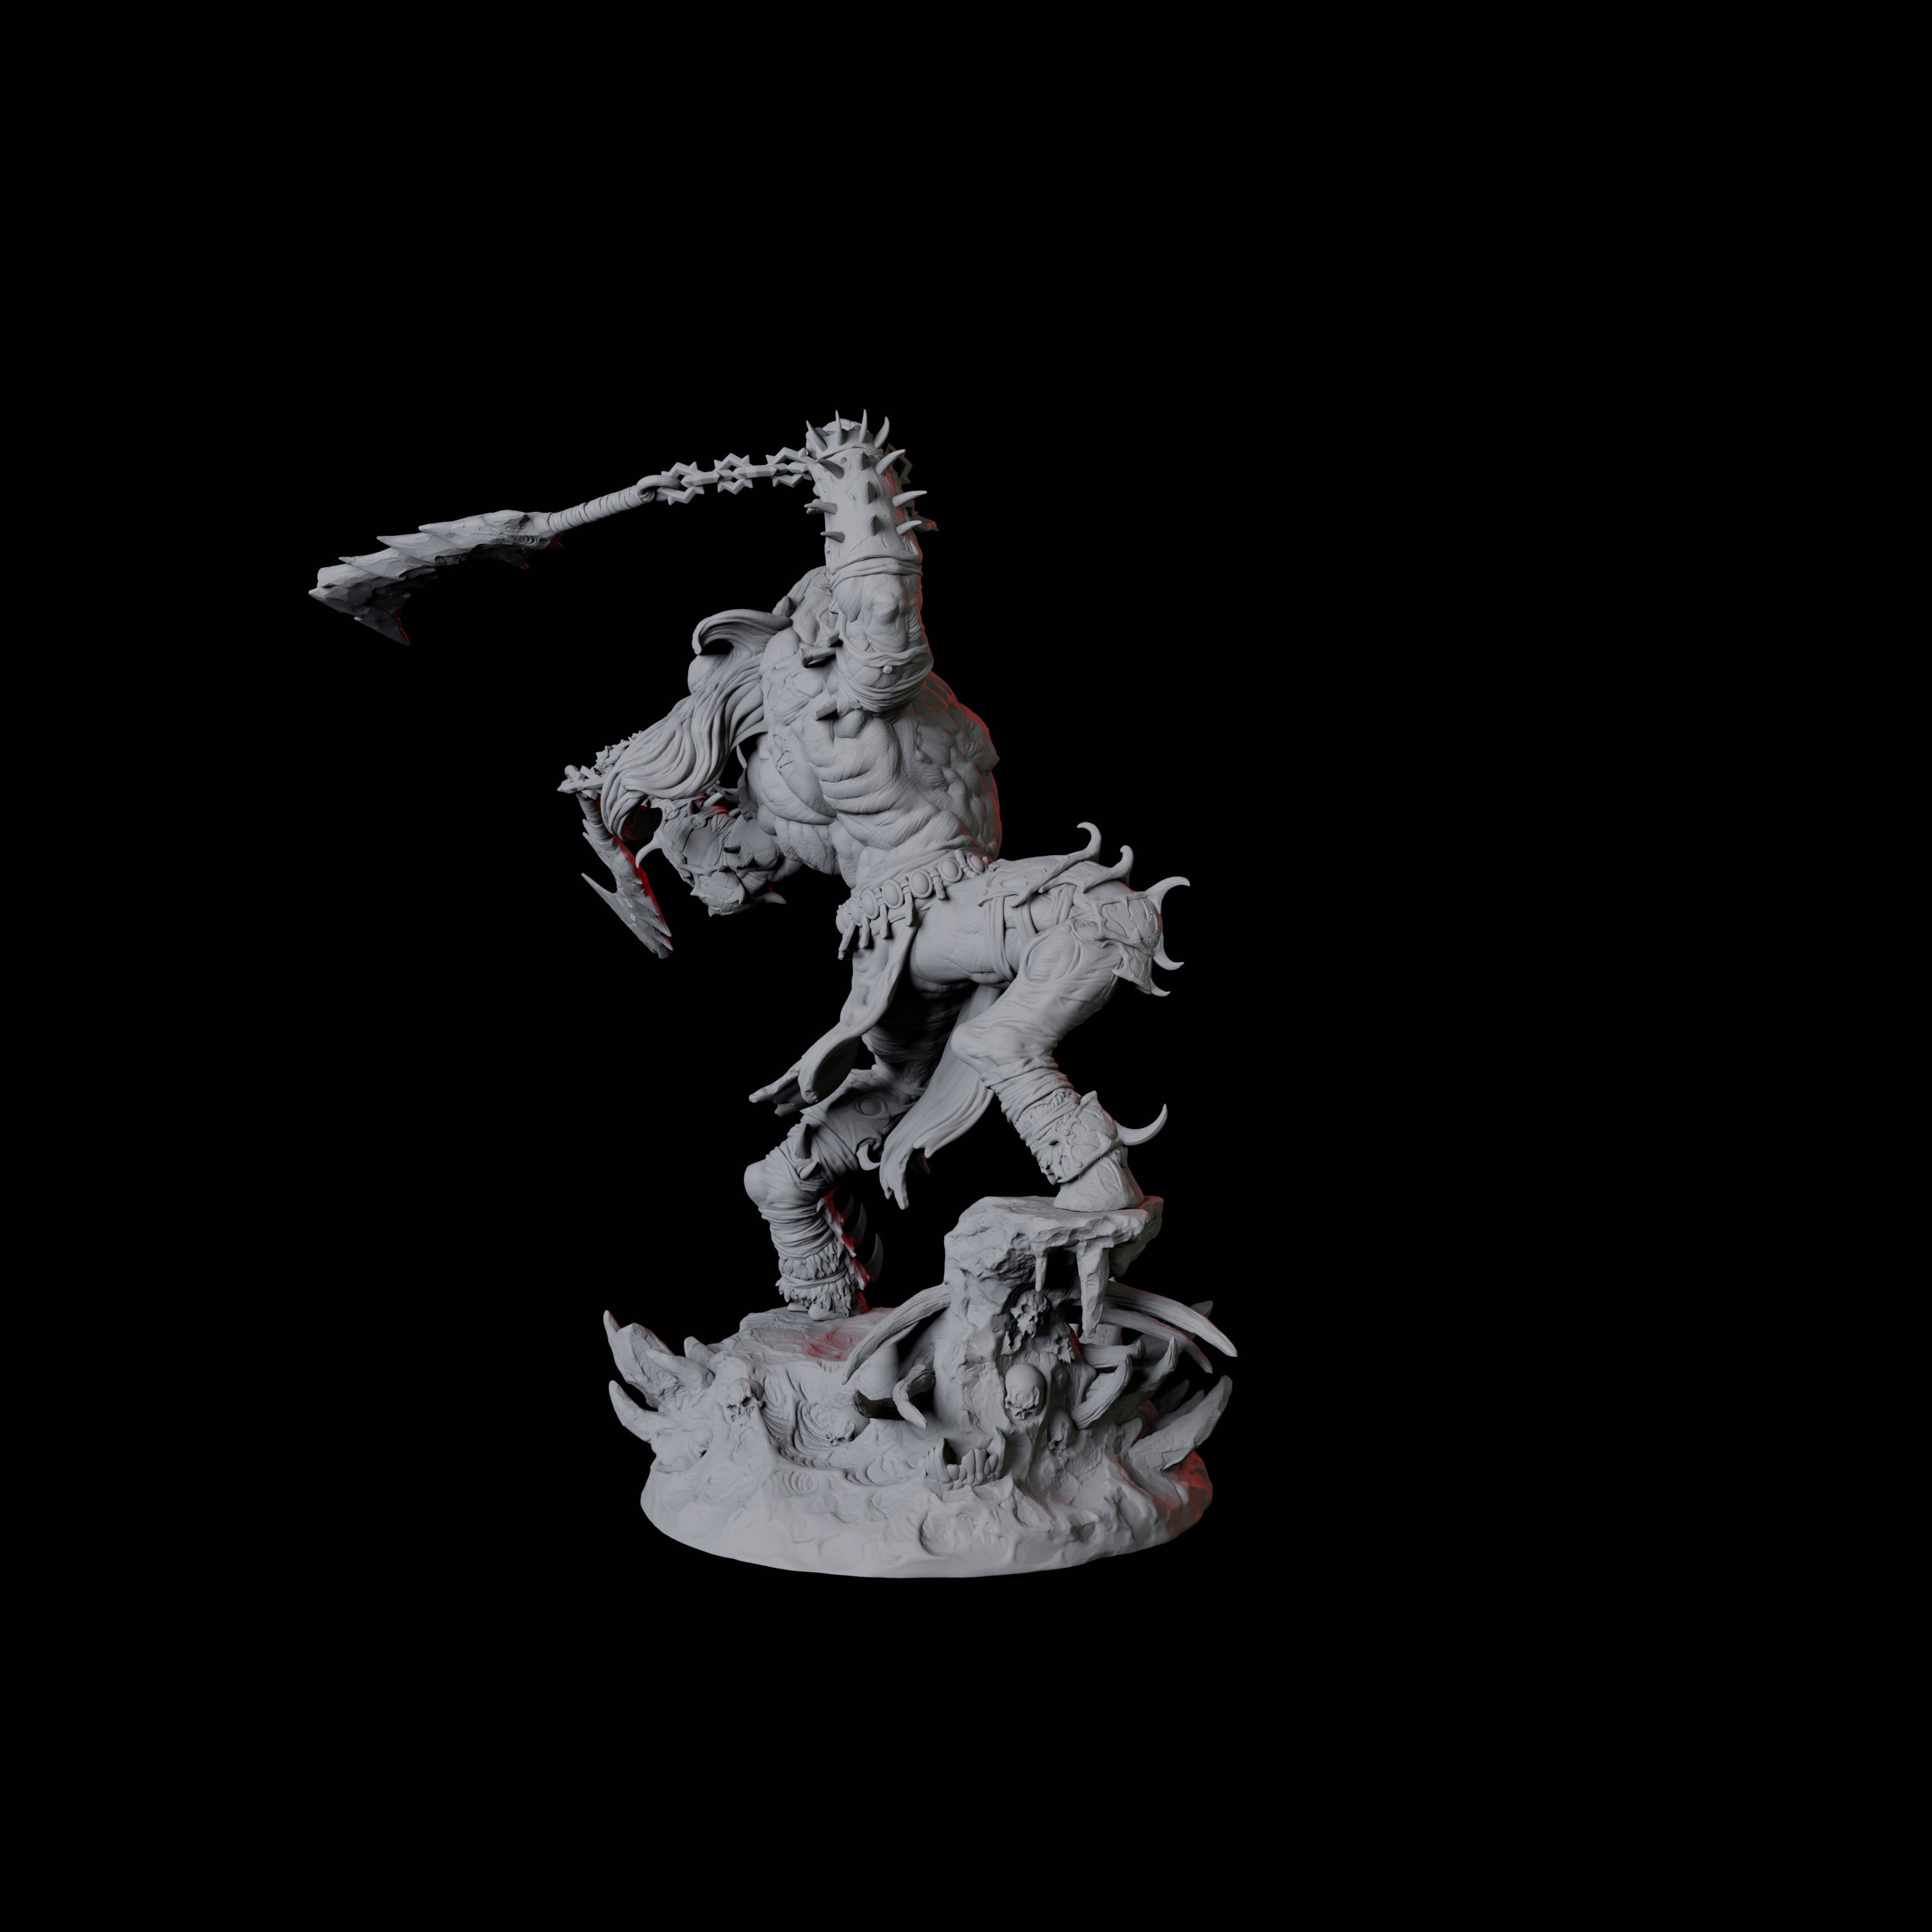 Four Savage Roru Demons Miniature for Dungeons and Dragons, Pathfinder or other TTRPGs